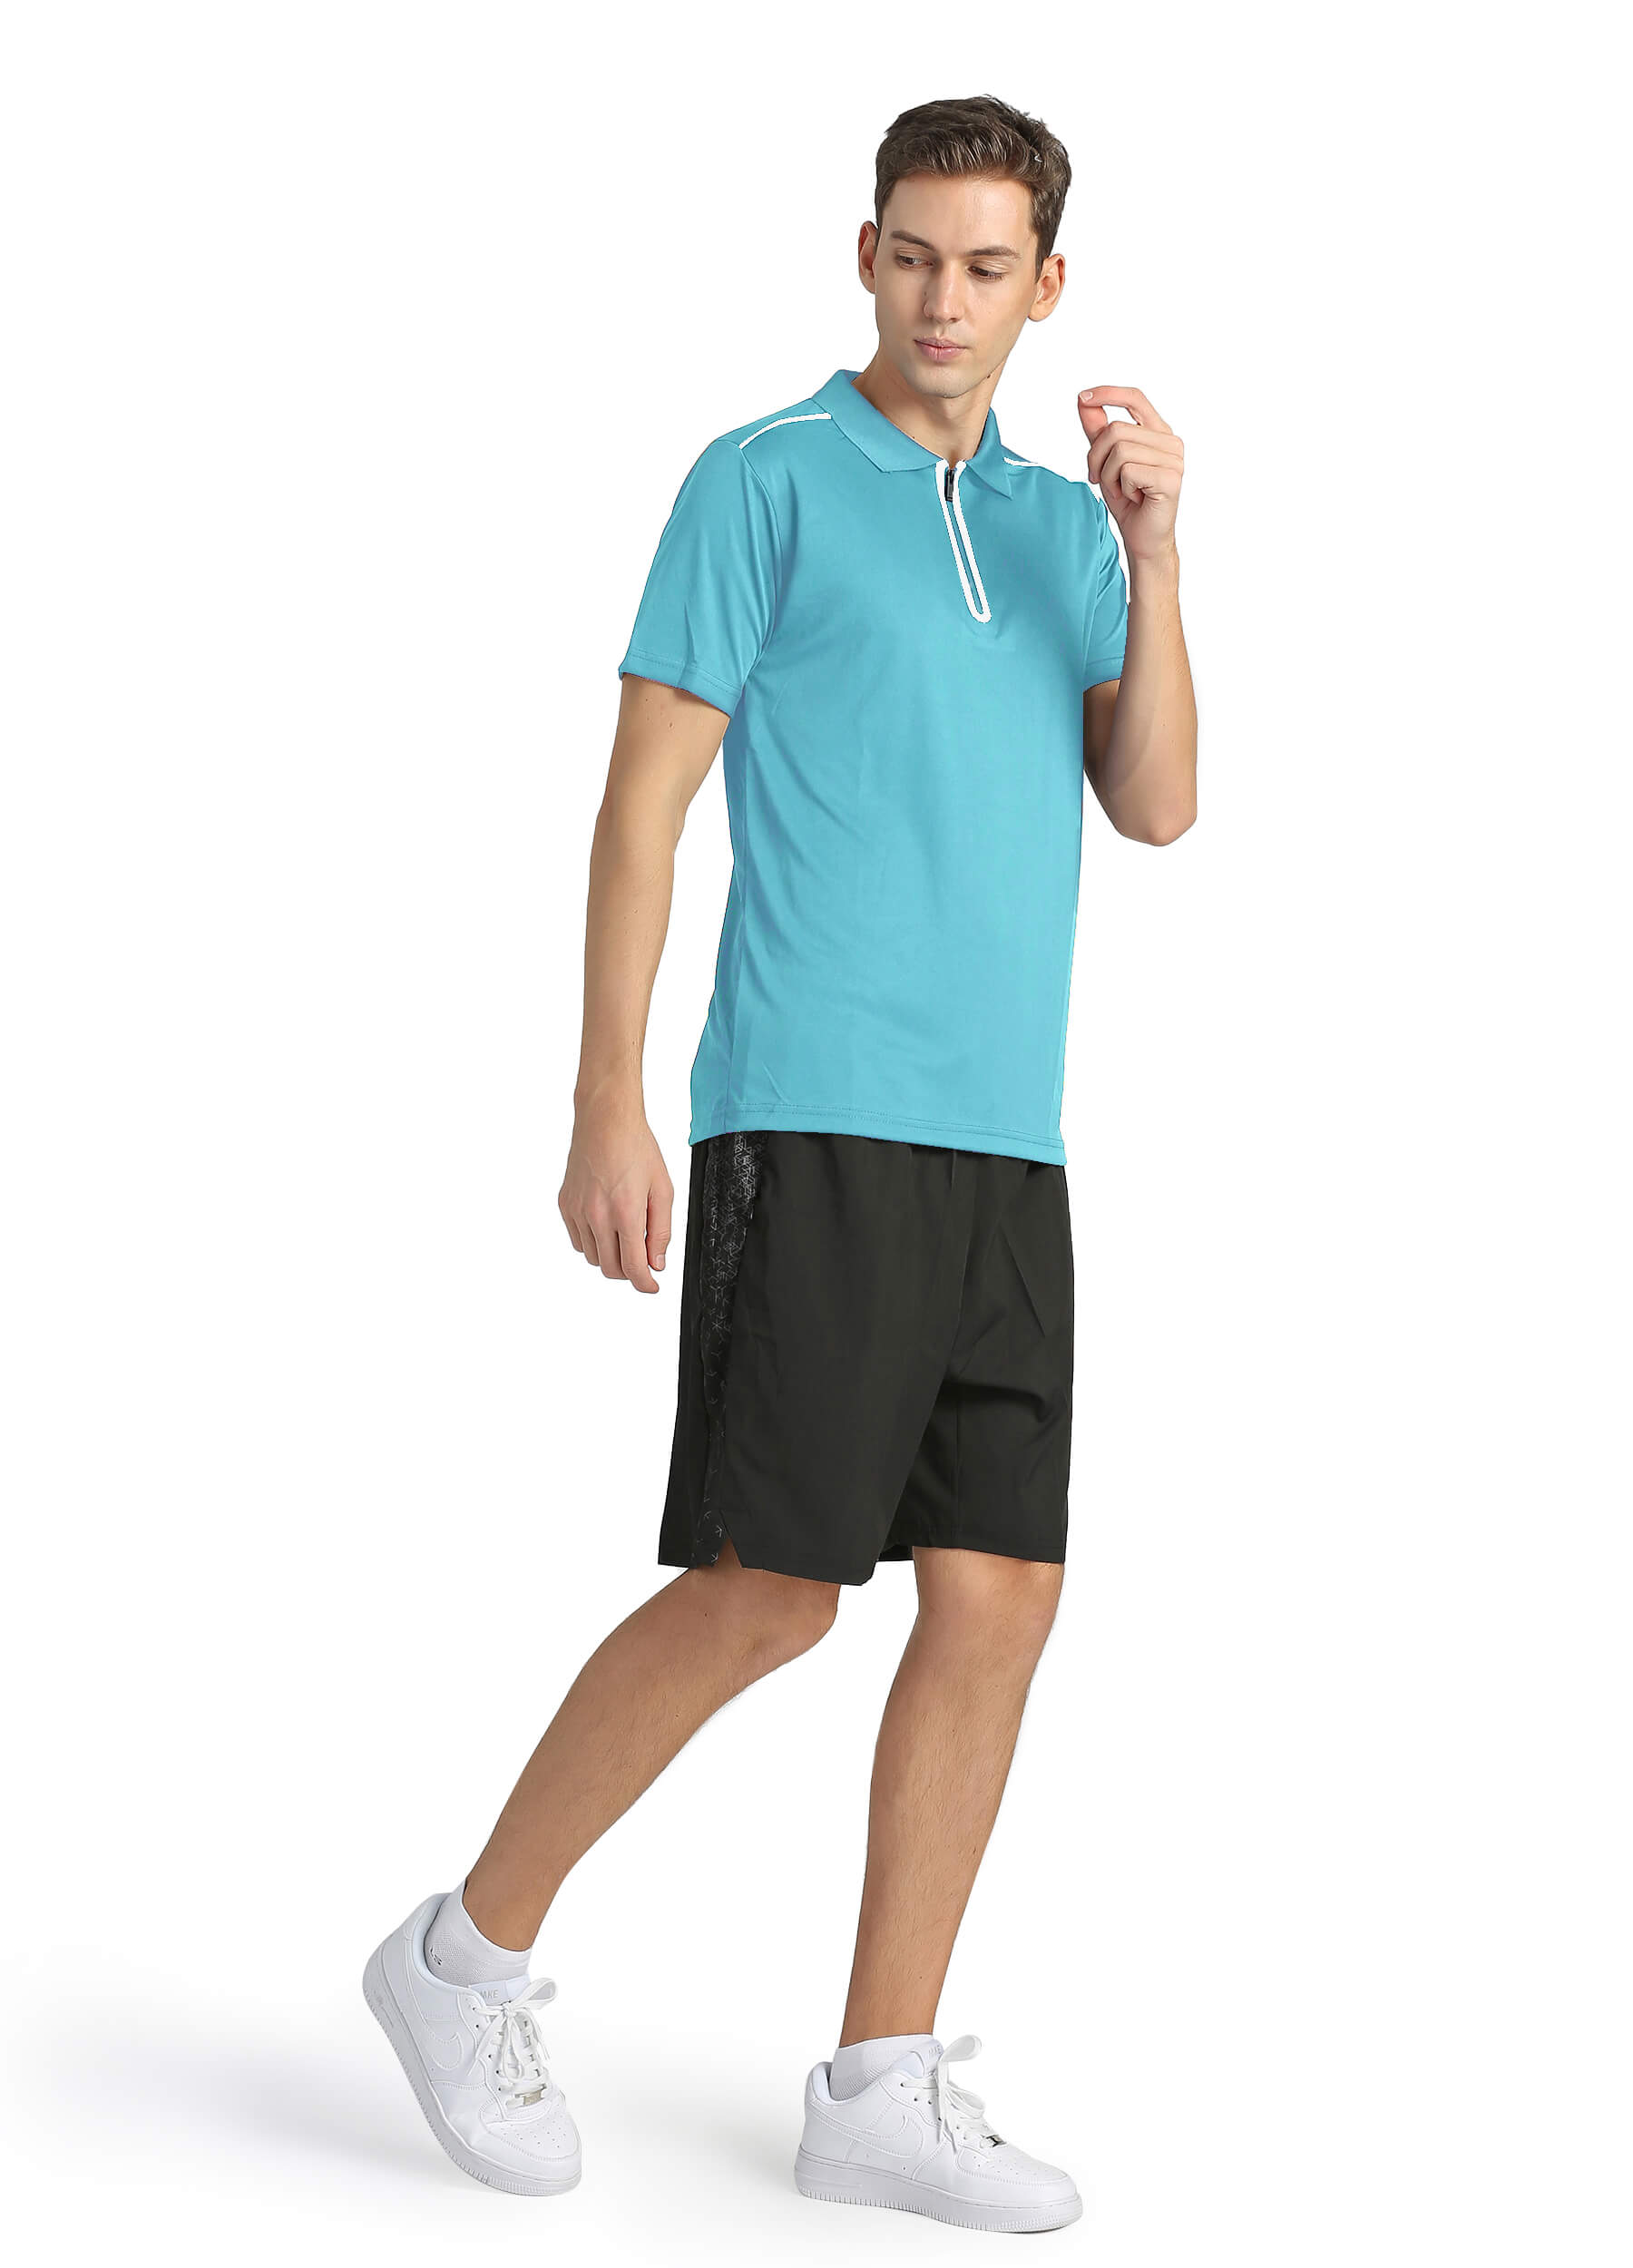 4POSE Men's Light Blue Moisture Wicking Quick Dry Golf Workout Polo Shirt (Clearance)